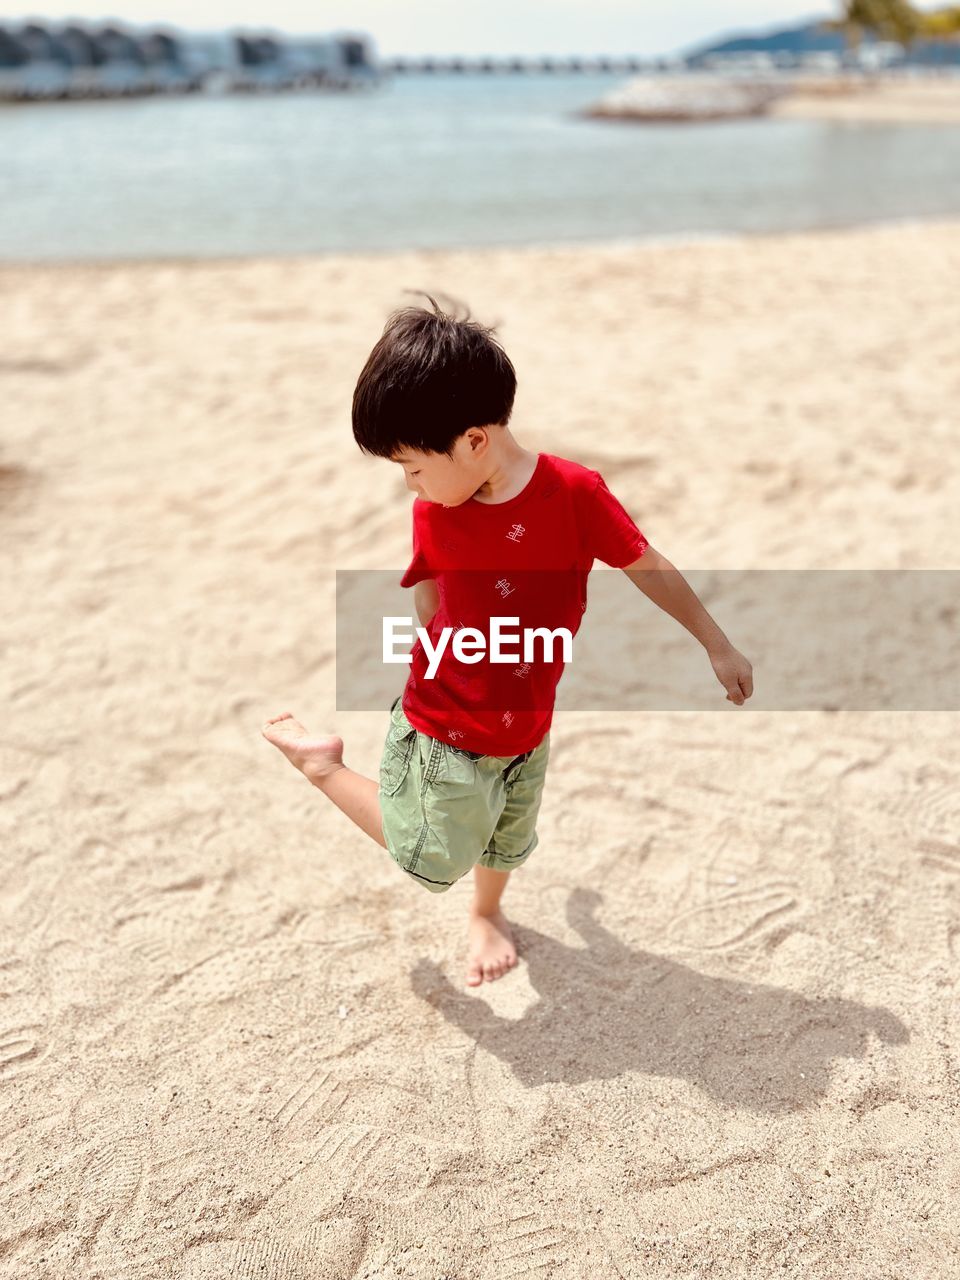 childhood, child, beach, sand, land, one person, full length, men, nature, water, sea, toddler, fun, day, red, innocence, holiday, barefoot, leisure activity, motion, vacation, person, baby, casual clothing, outdoors, trip, clothing, sunlight, happiness, emotion, cute, enjoyment, summer, focus on foreground, carefree, lifestyles, sky